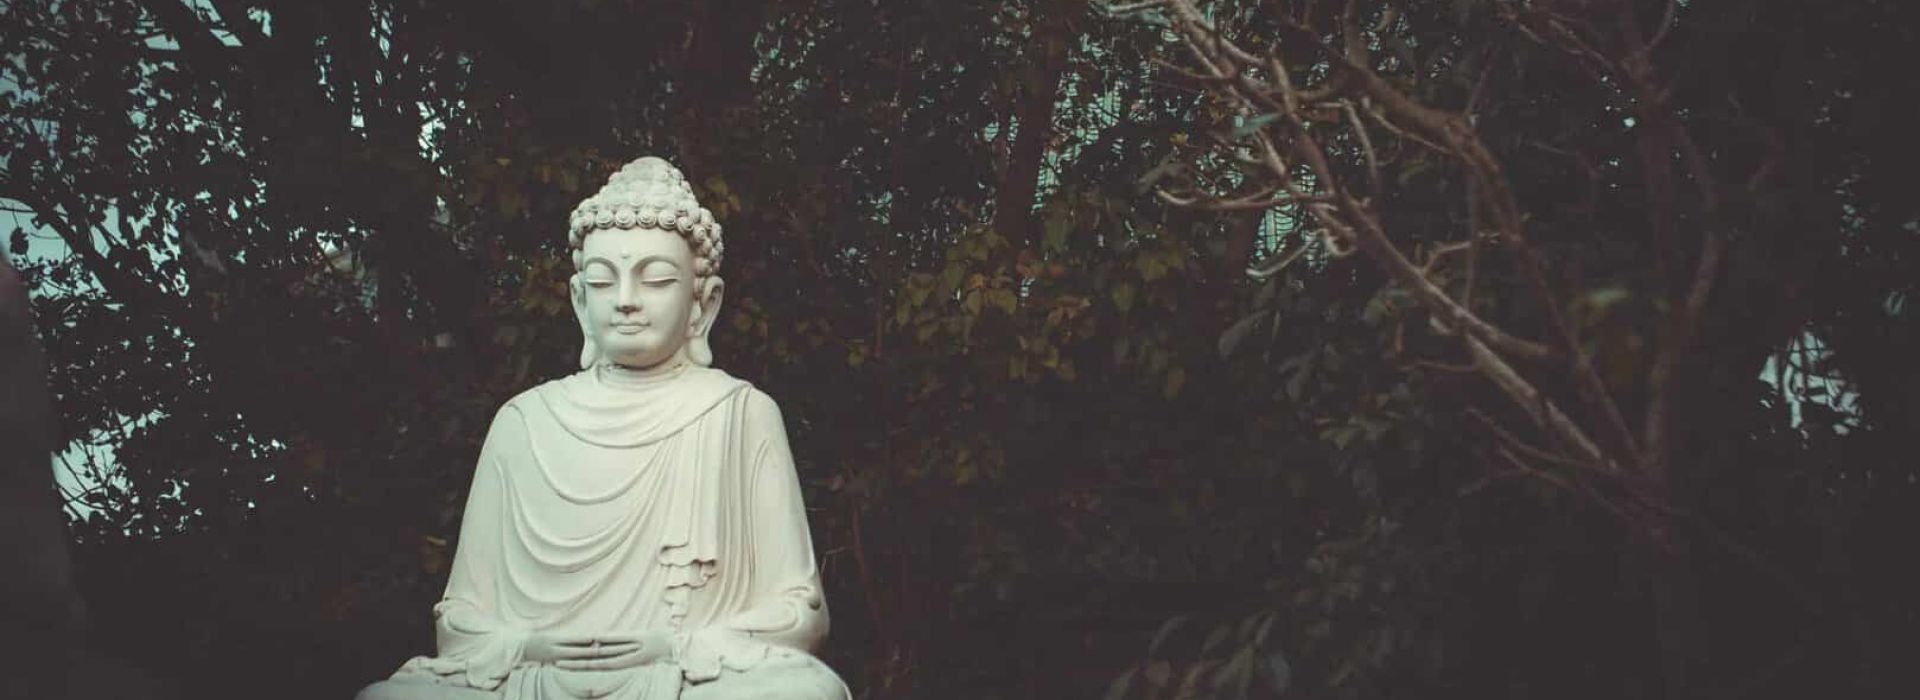 Recovery Dharma: Buddhist Approach to Addiction Recovery